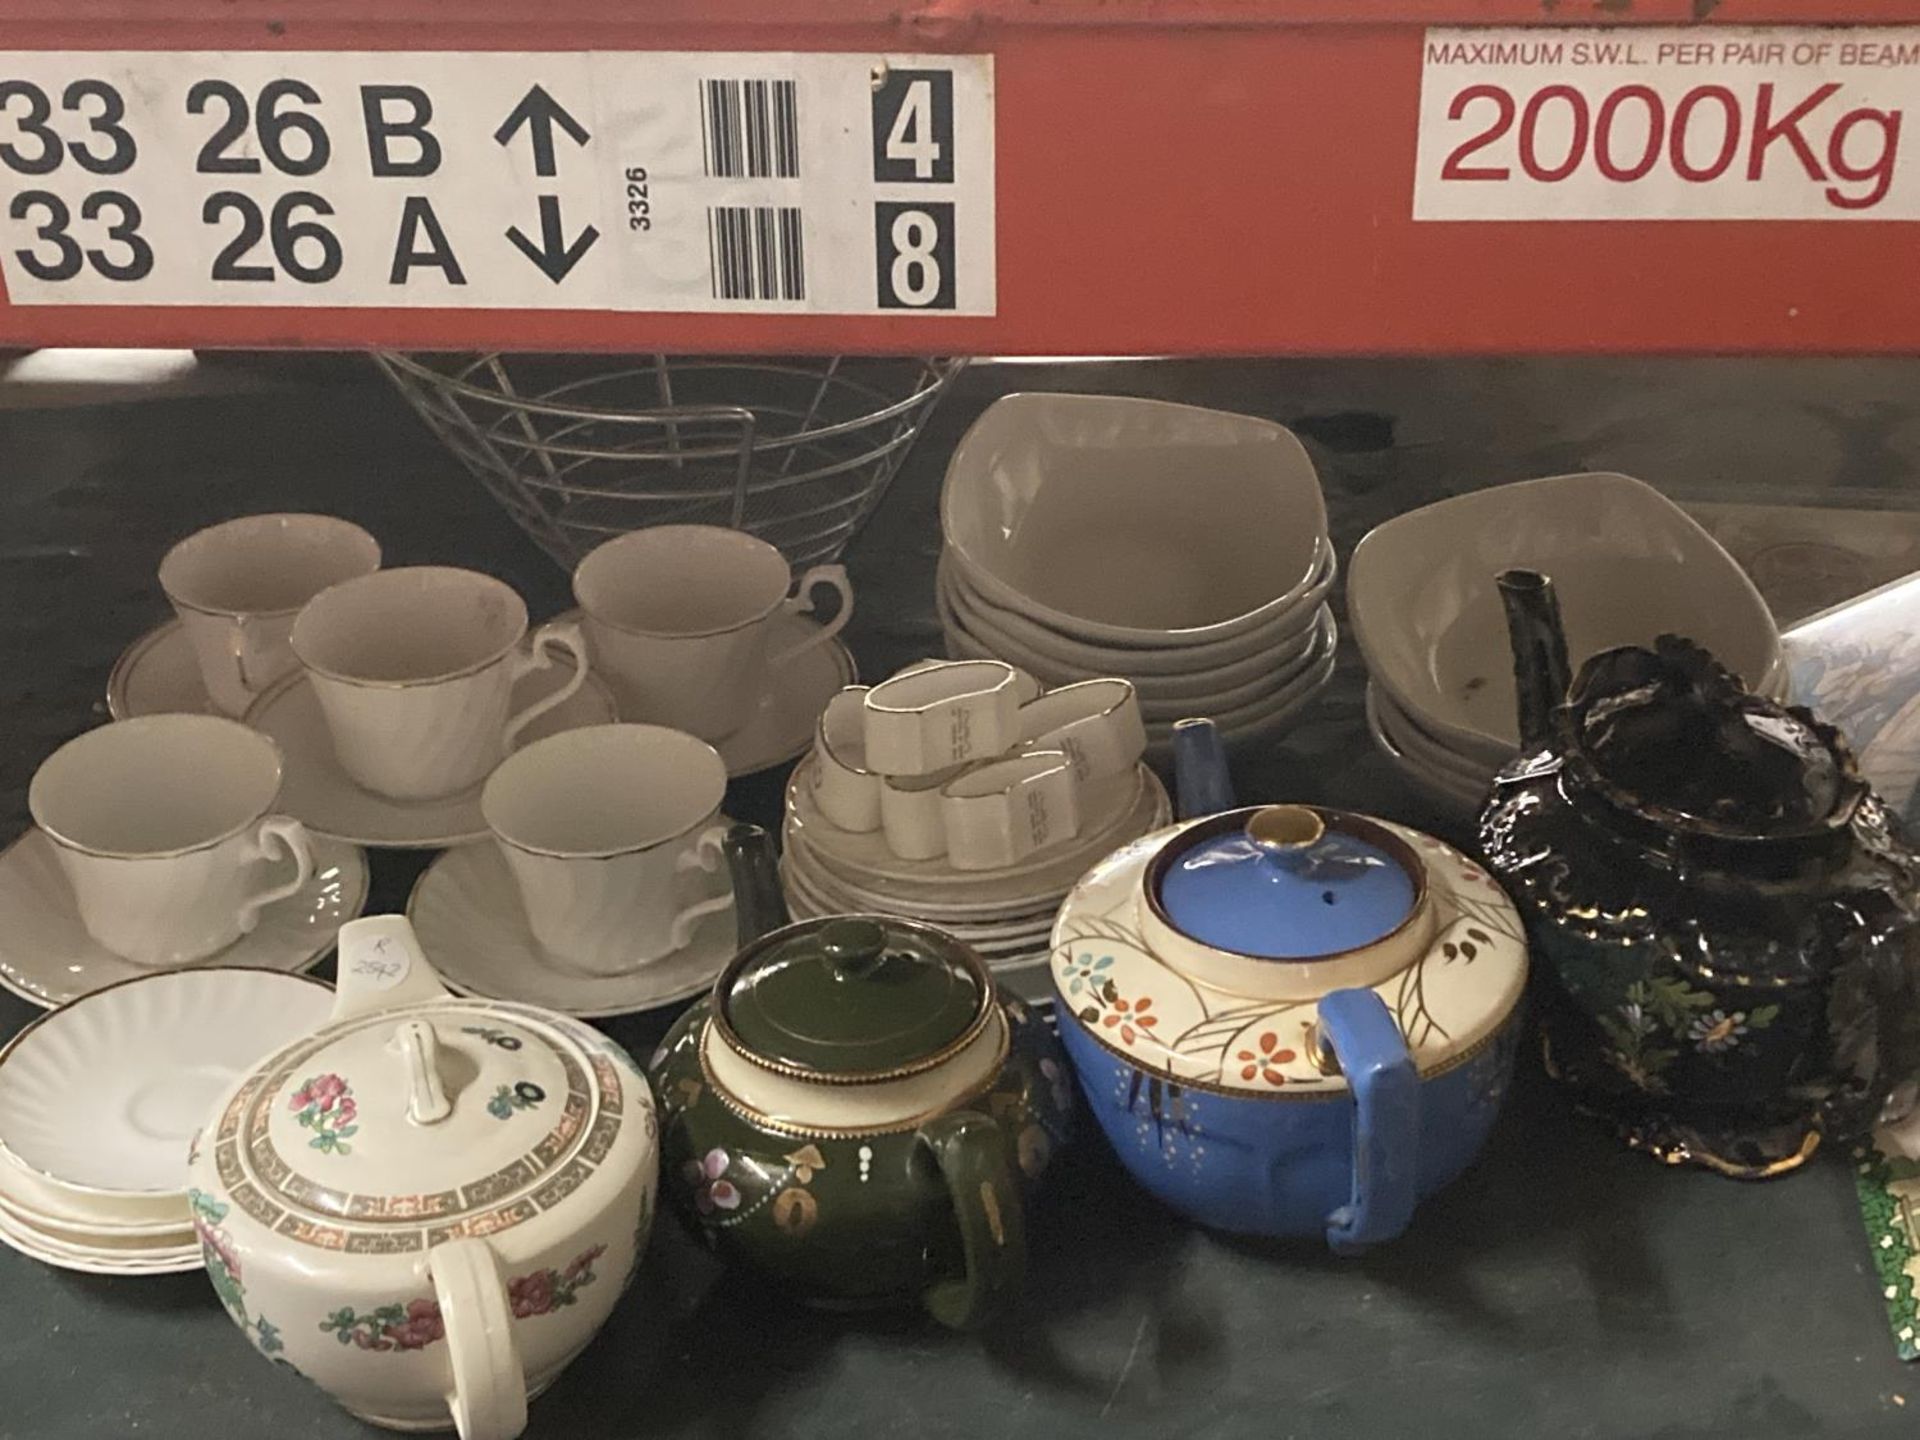 FOUR COLLECTABLE TEA POTS AND VARIOUS WHITE CERAMICS TO INCLUDE CUPS. SAUCERS, BOWLS, PLATES ETC